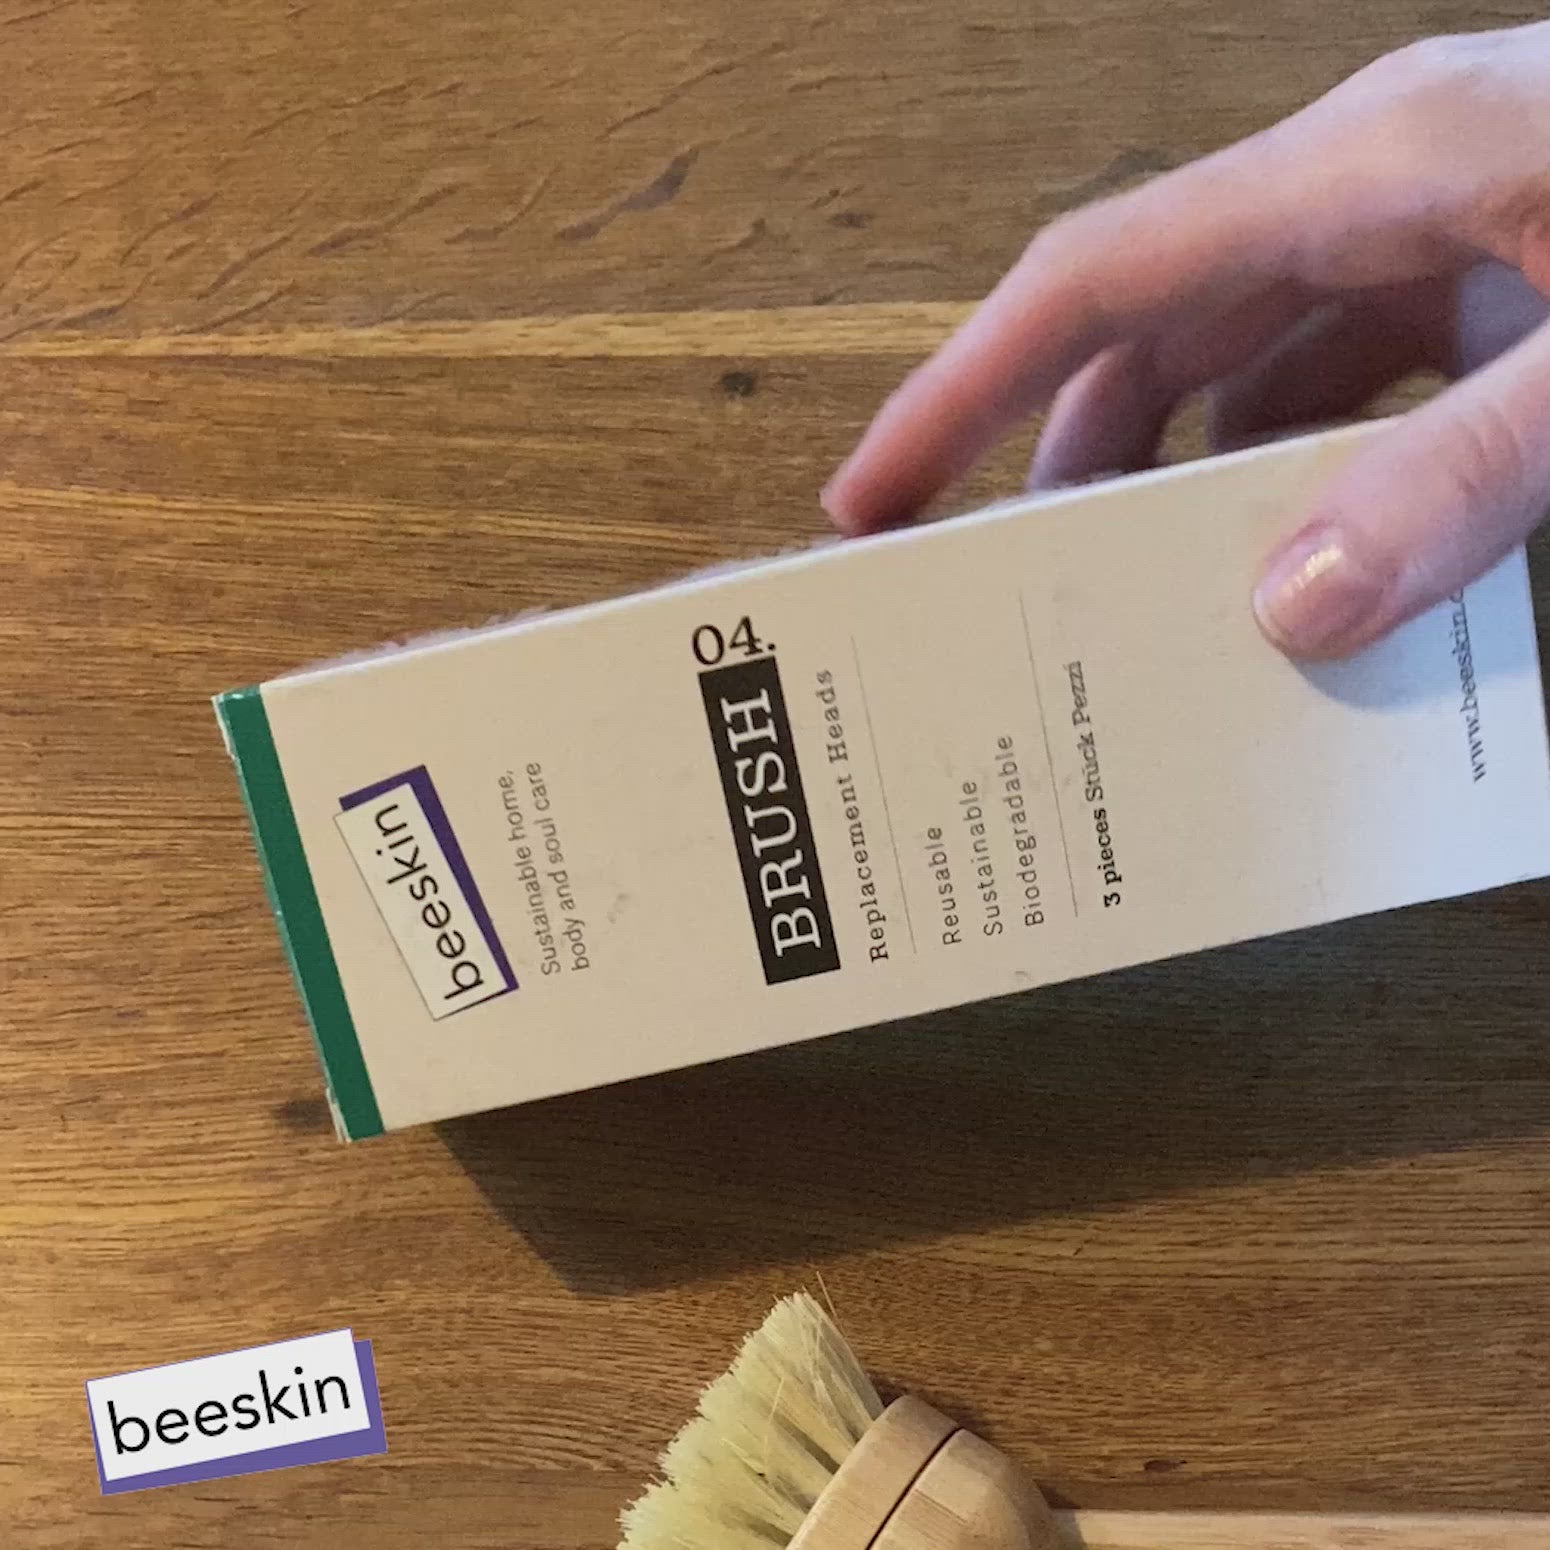 unboxing replacement heads for beeskin dishwasher brush